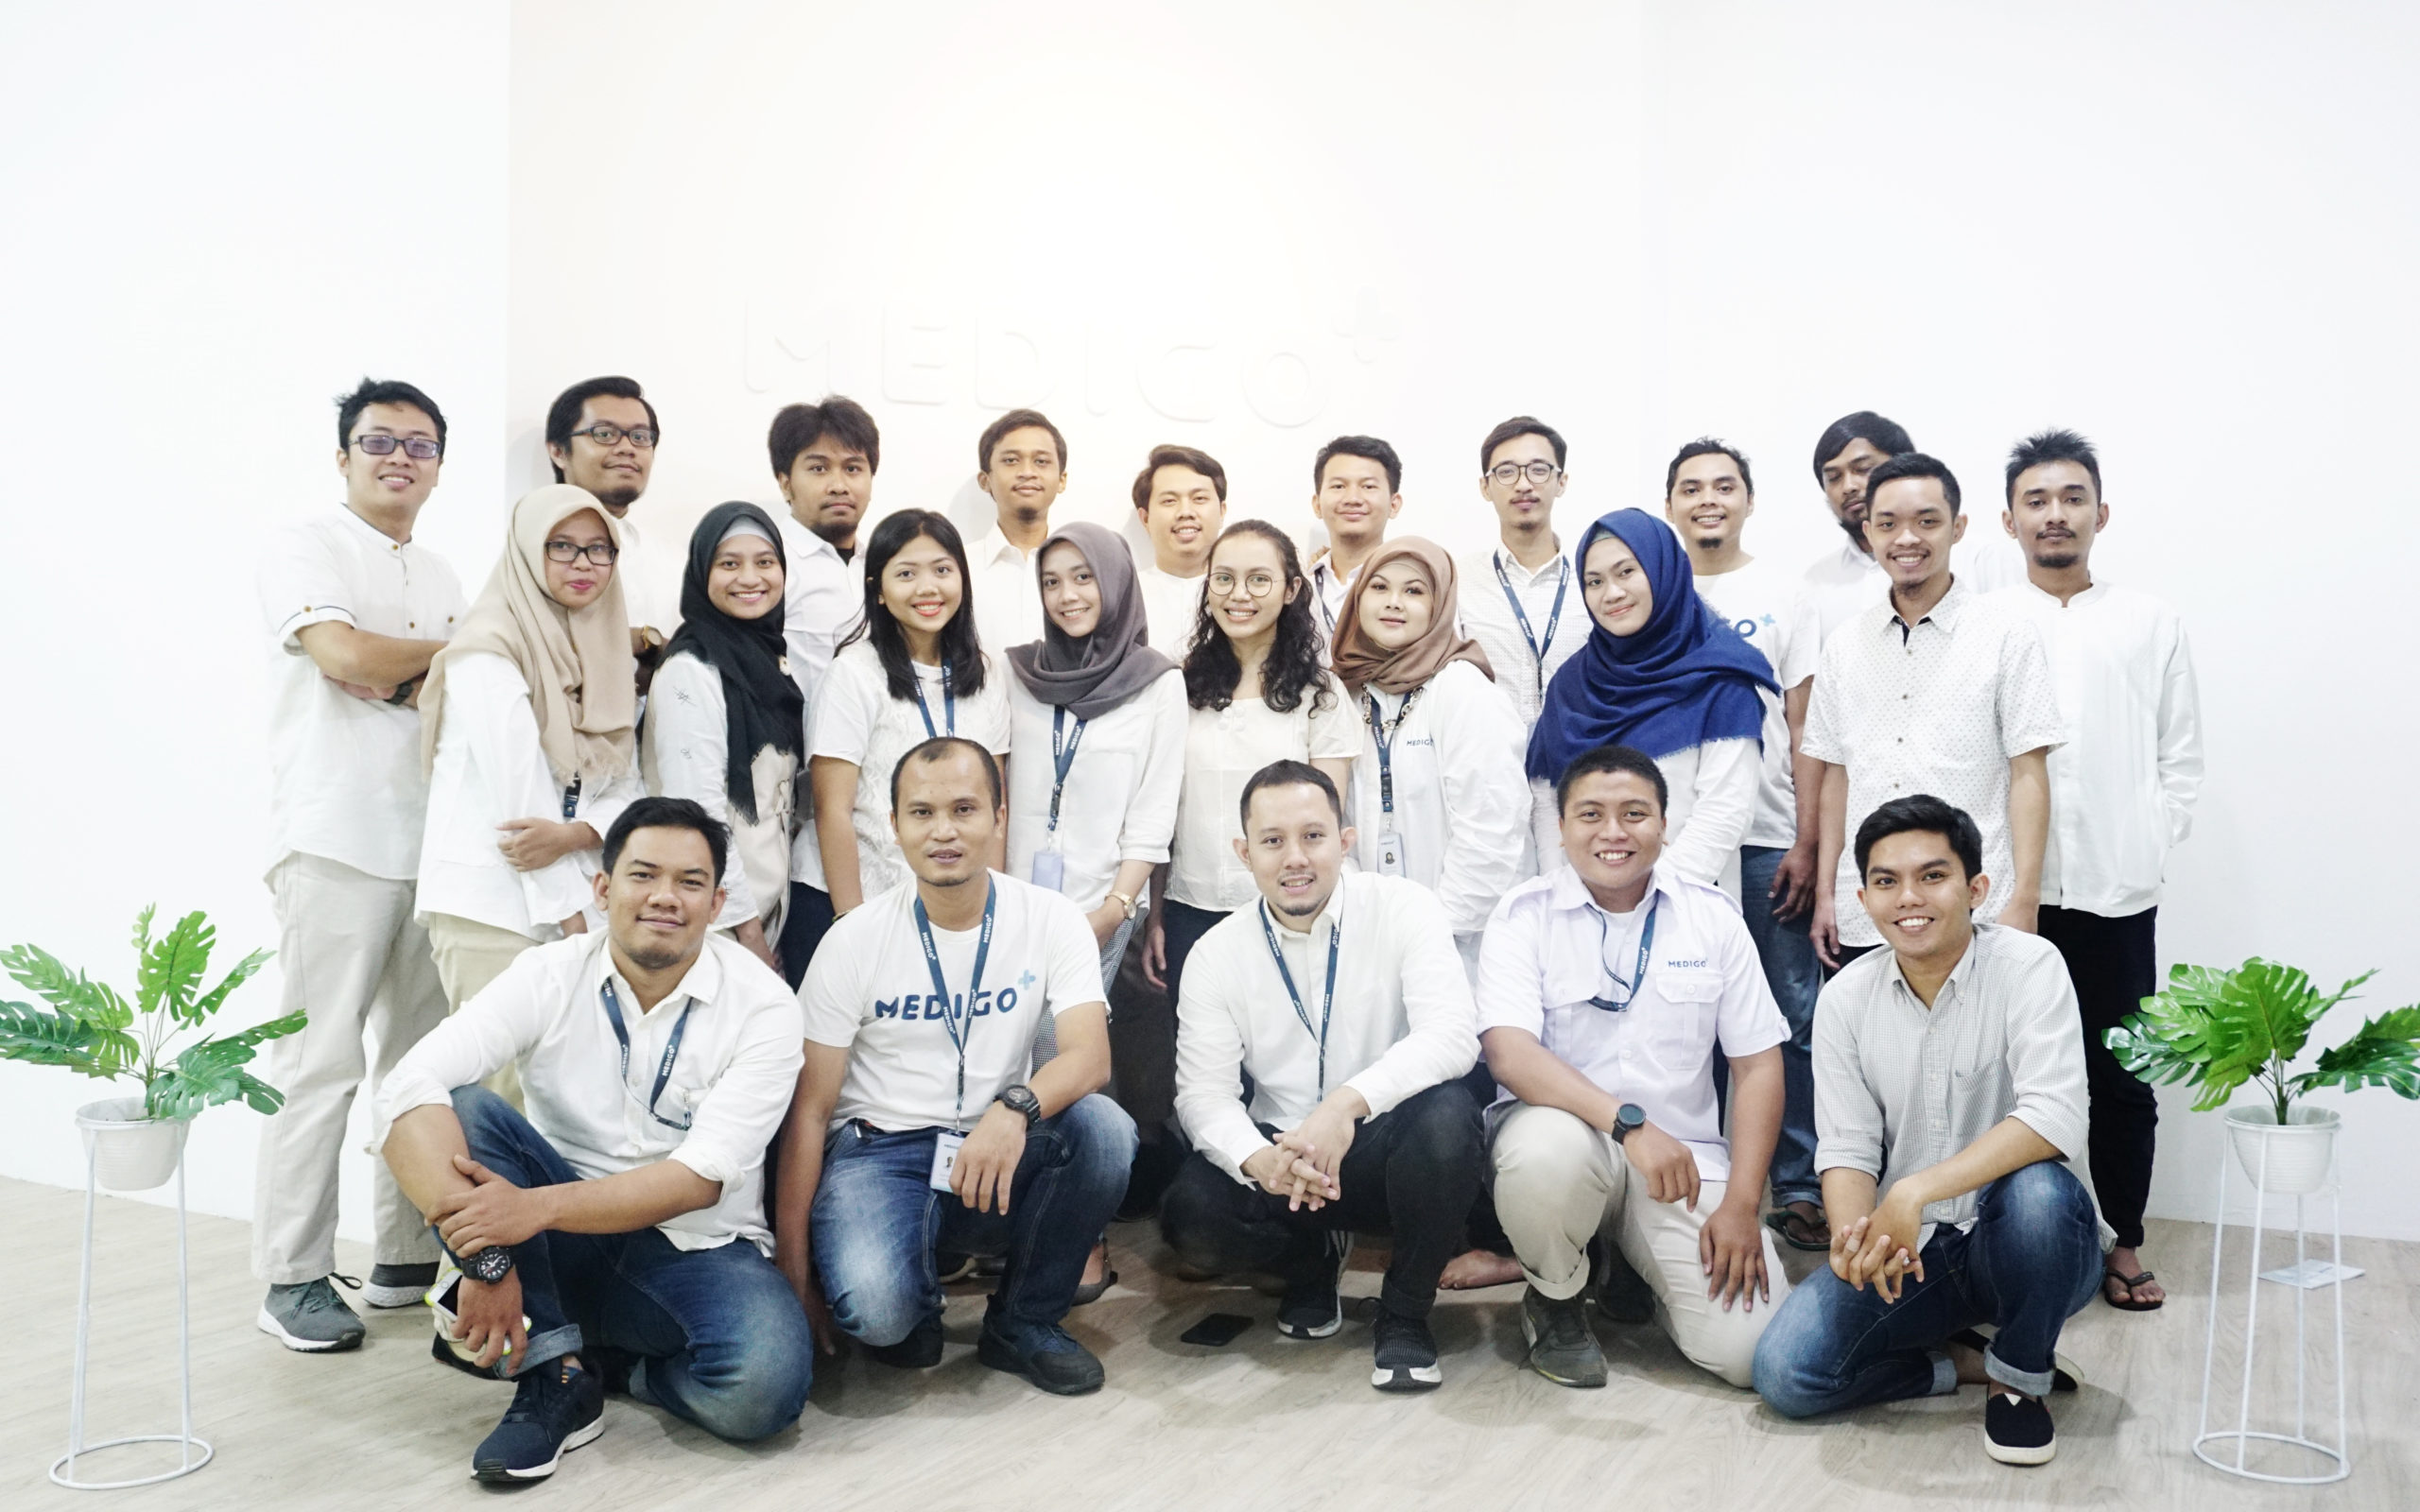 Tuning In | Harya Bimo on digitizing Indonesia’s healthcare system from the ground up